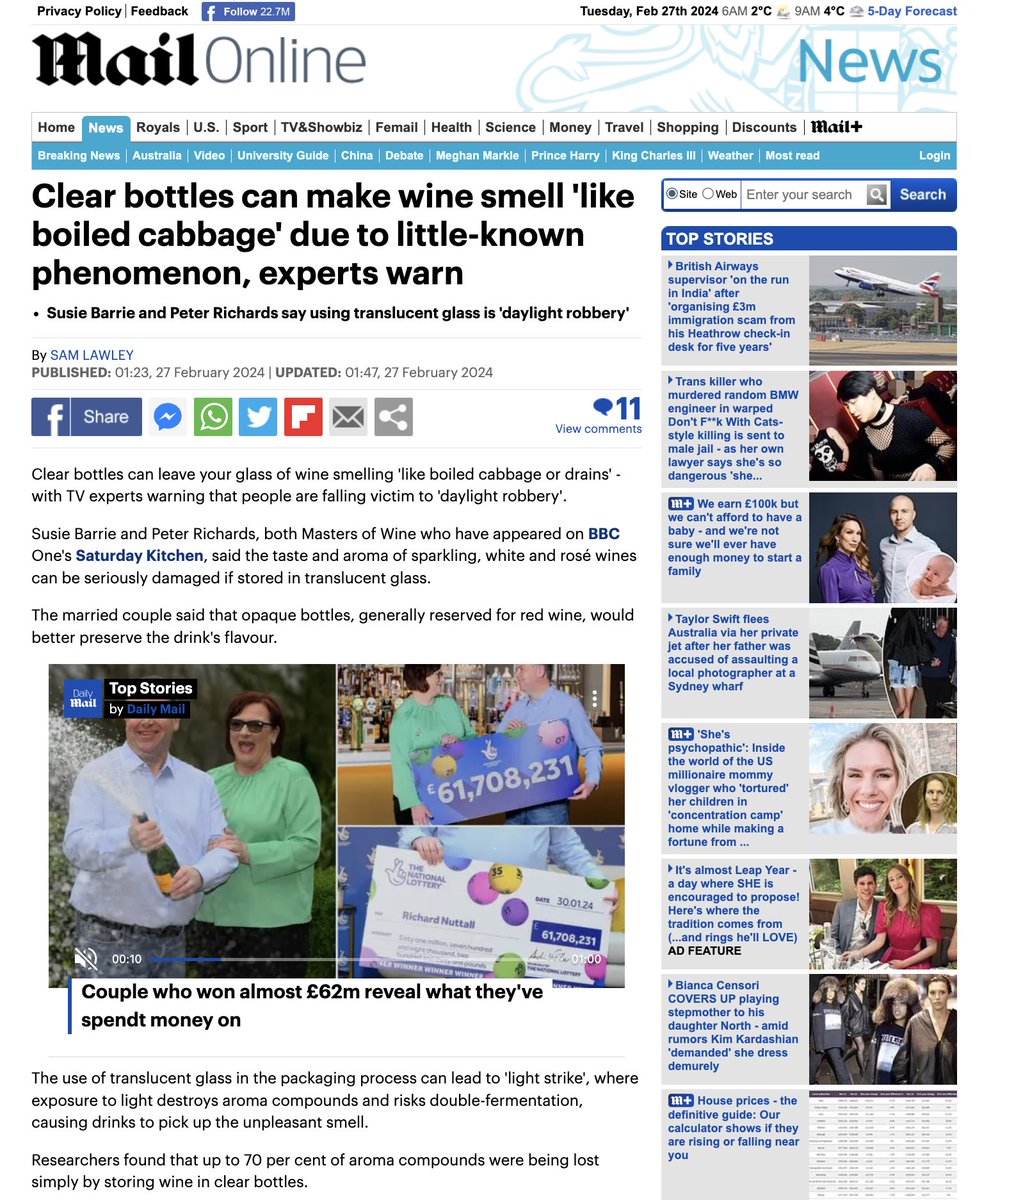 Great to see the scandalous issue of light-strike generating some attention in the national media after our latest pod 🙏📰💡🥂👍 Apparently it even made it onto the radio waves too 🎙️ This is a really important topic and one that needs to be more visible!